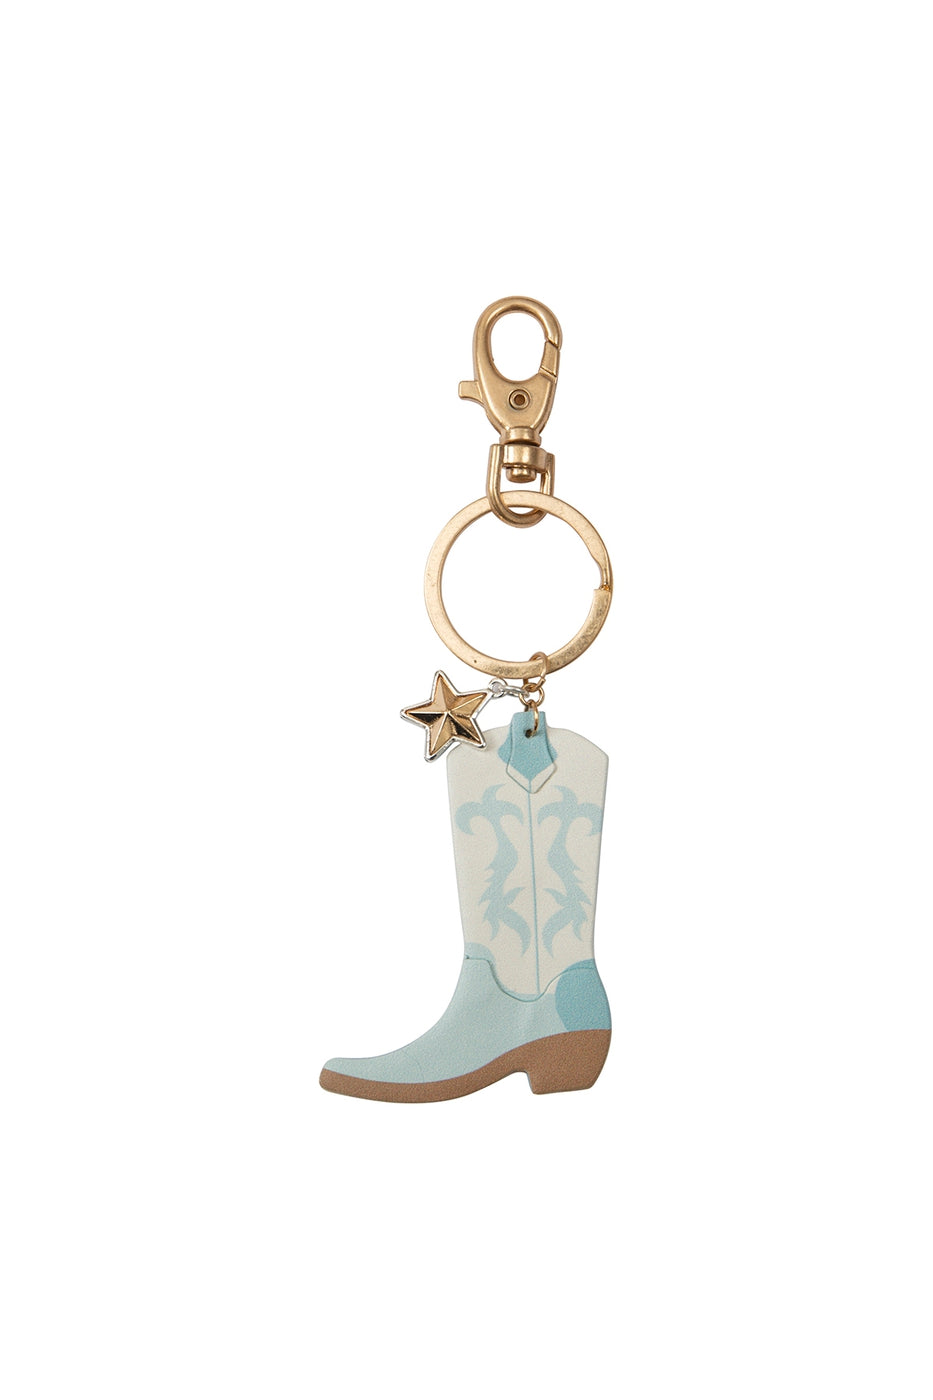 "Boys in Boots" Keychain